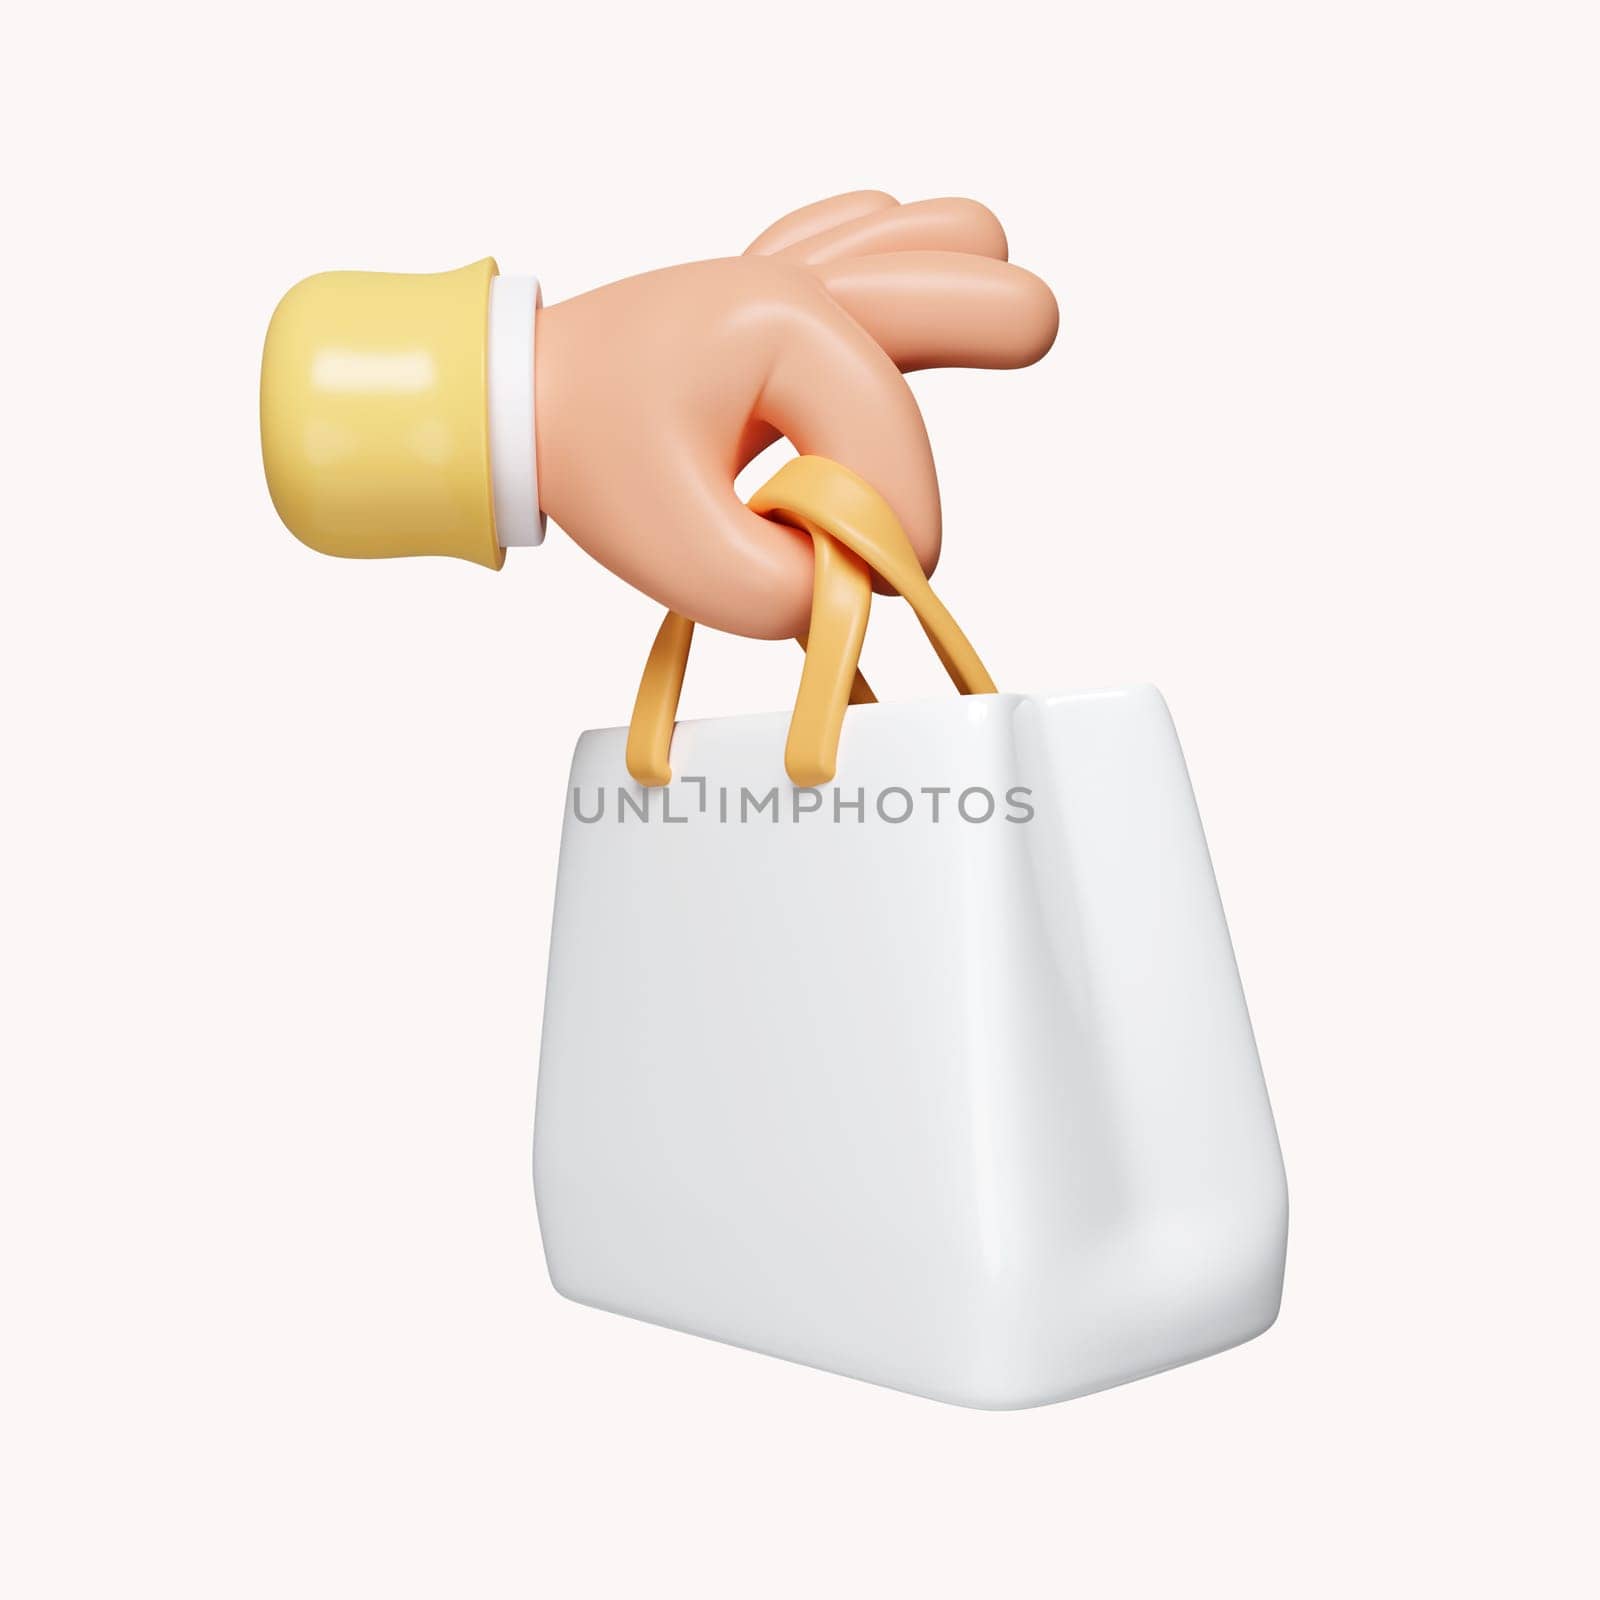 3d Hand holding shopping bag. online shopping. sale promotion. Shopping and season sale concept. icon isolated on white background. 3d rendering illustration. Clipping path. by meepiangraphic